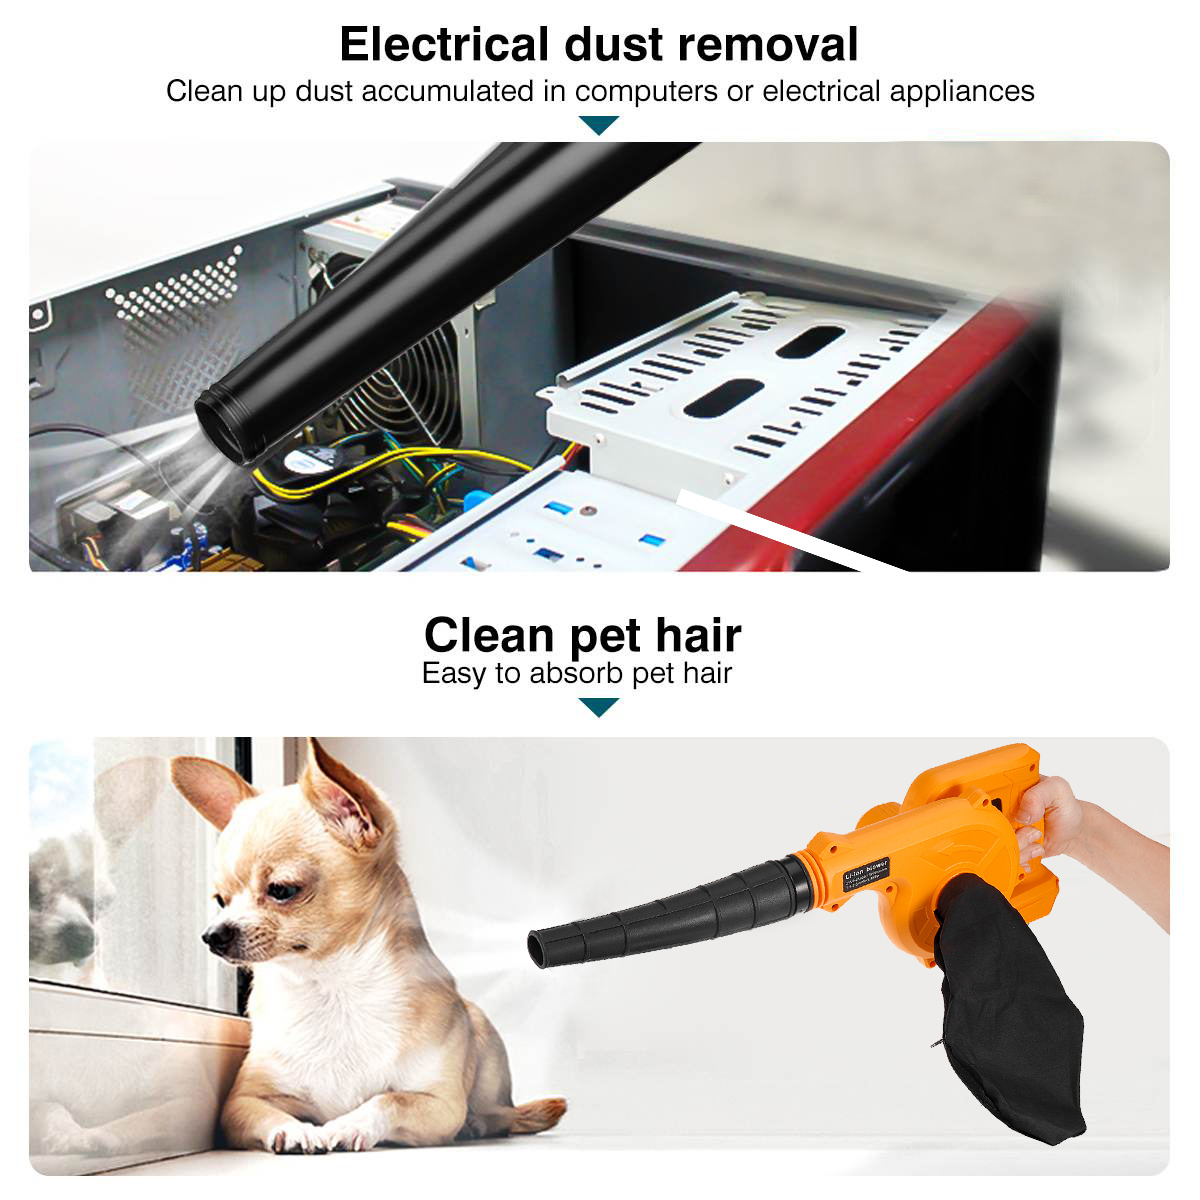 2-in-1-Cordless-Electric-Air-Blower--Suction-Dust-Remover-Leaf-Cleaner-for-Makita-18V-Battery-1856709-3